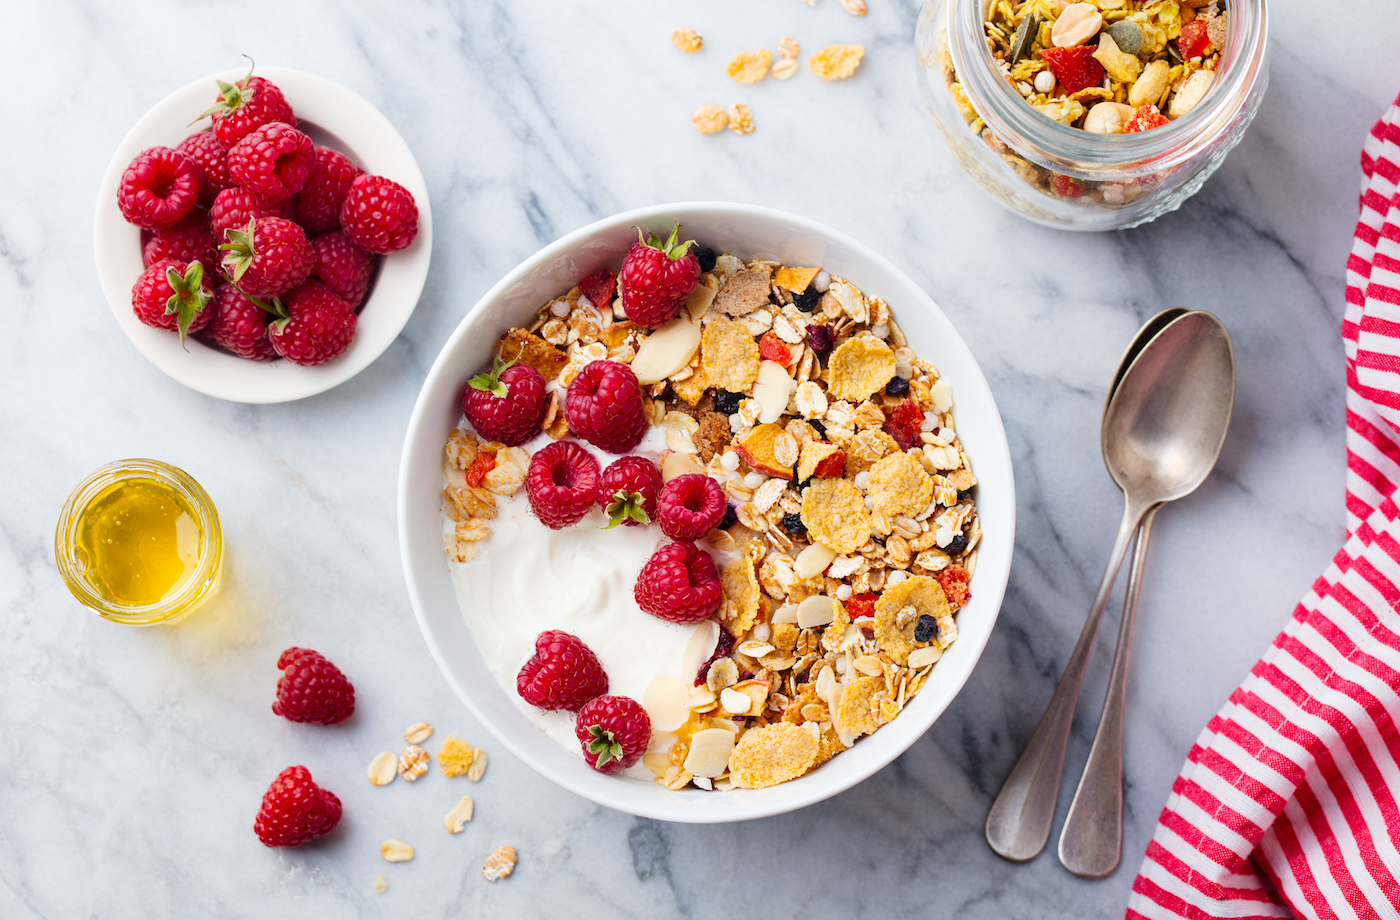 5 yogurt benefits that will inspire you to make it a regular in your breakfast rotation